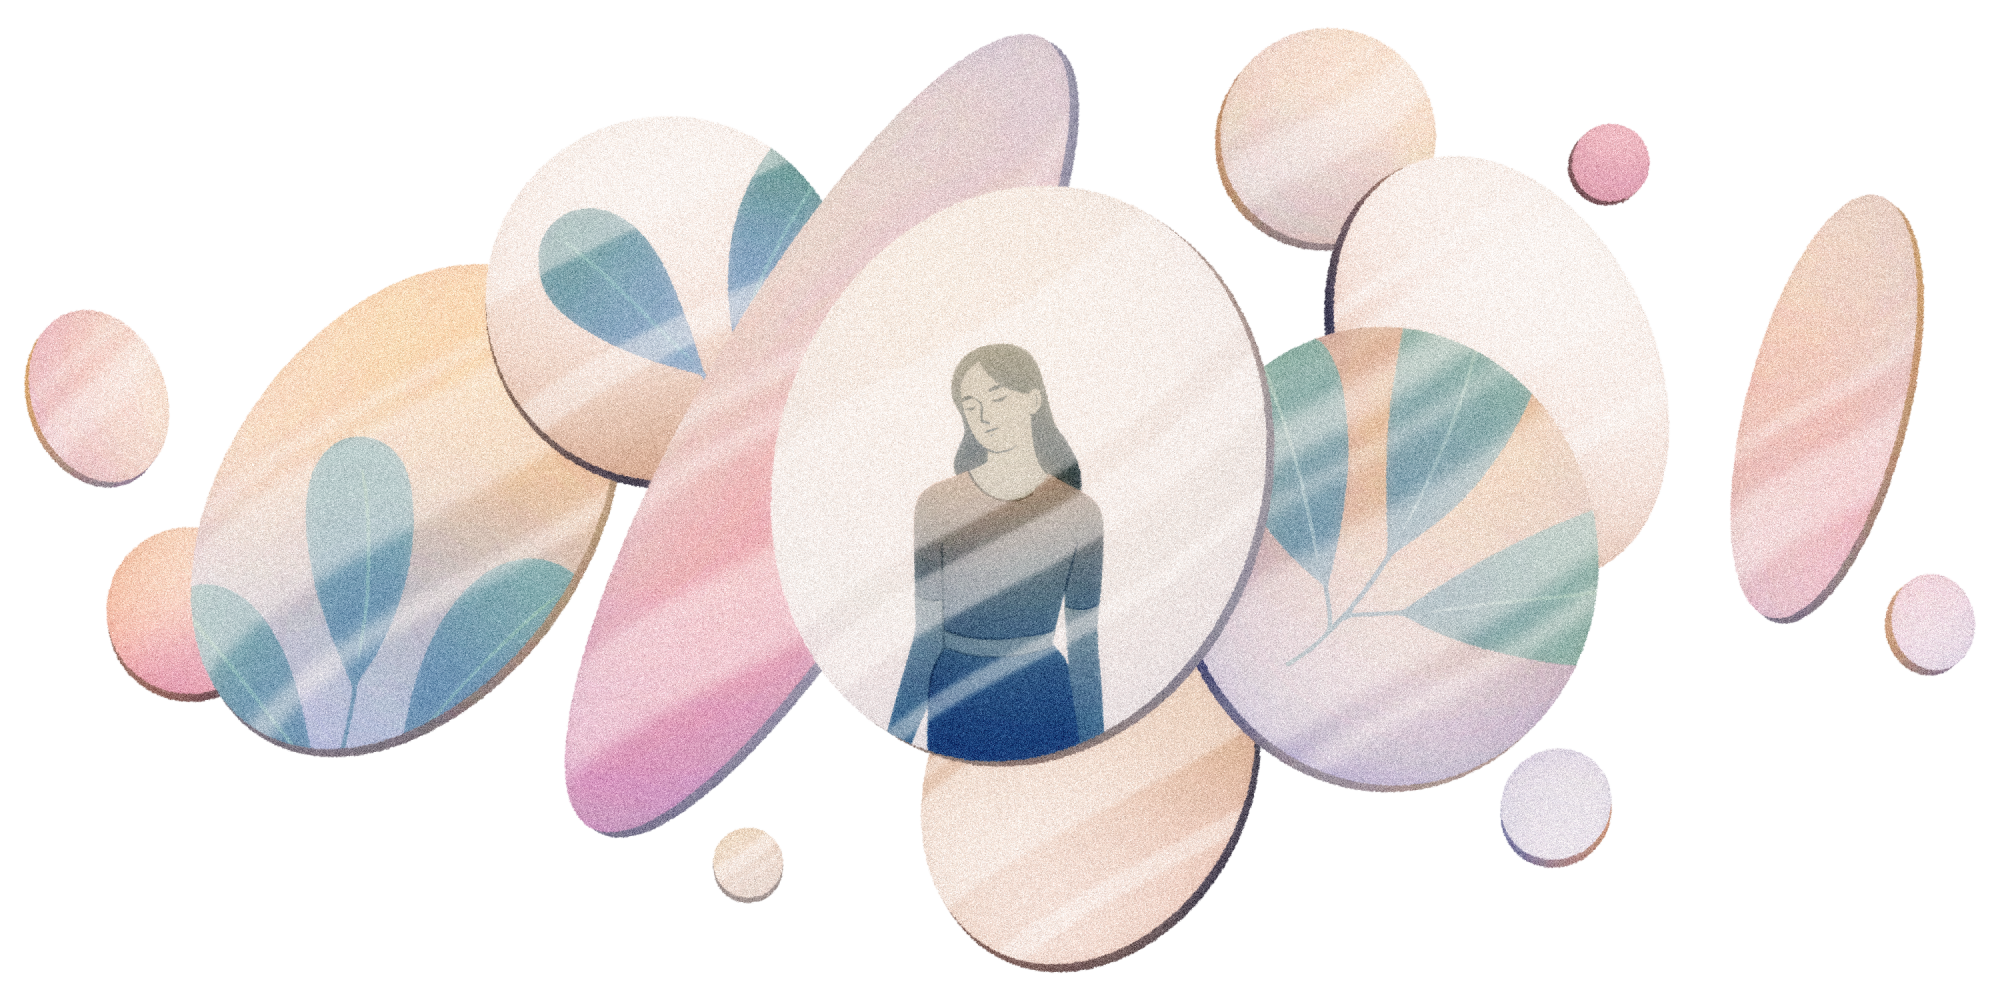 An illustration of a woman in a circle among colorful circles, some with leaves